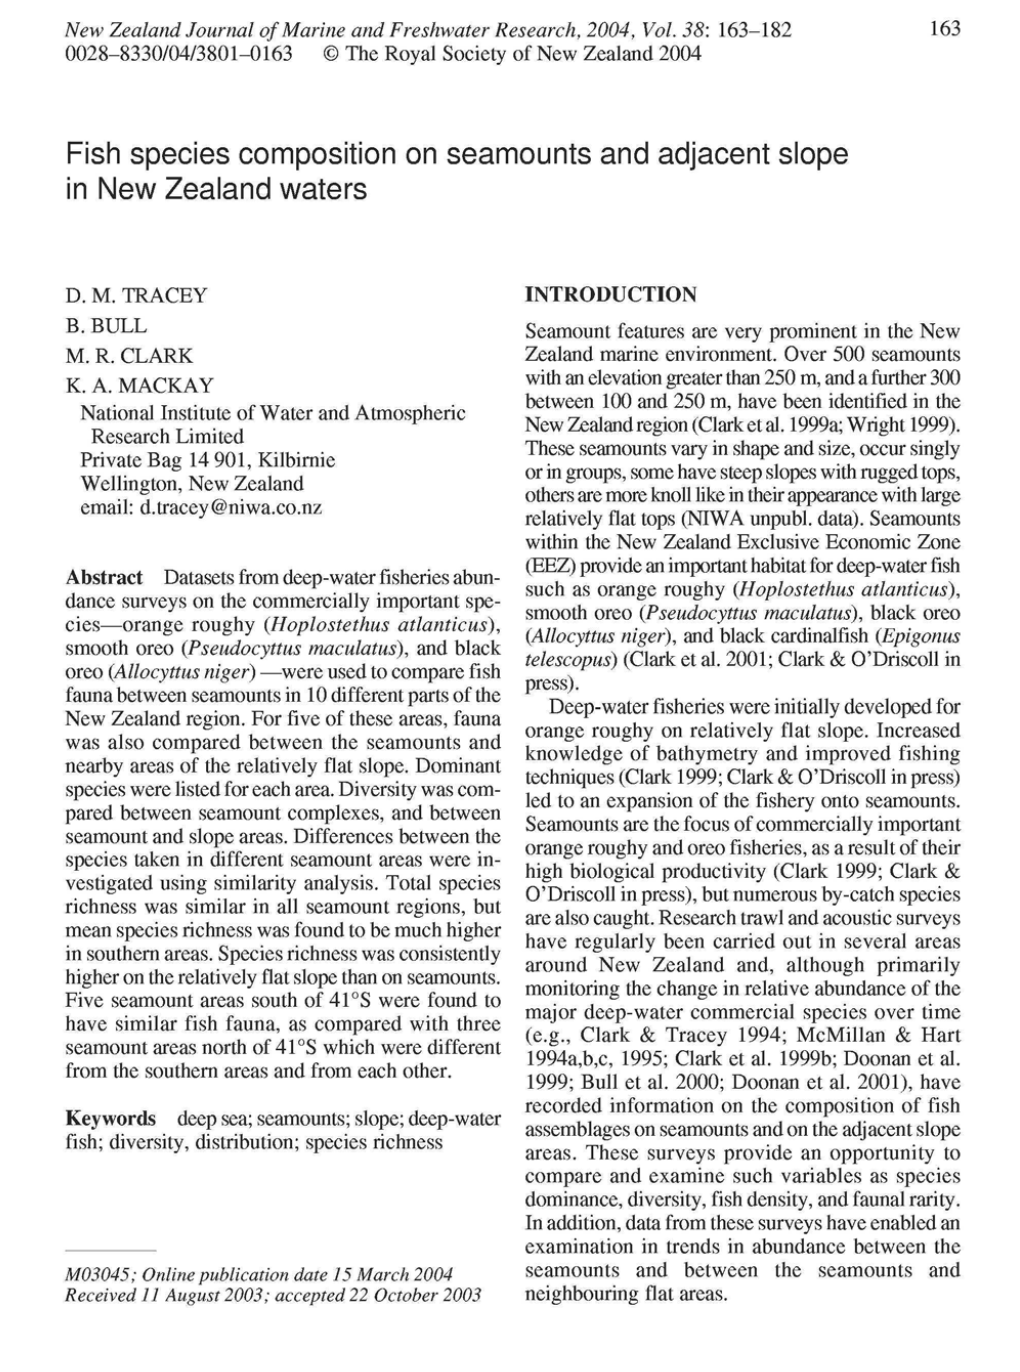 Fish Species Composition on Seamounts and Adjacent Slope in New Zealand Waters